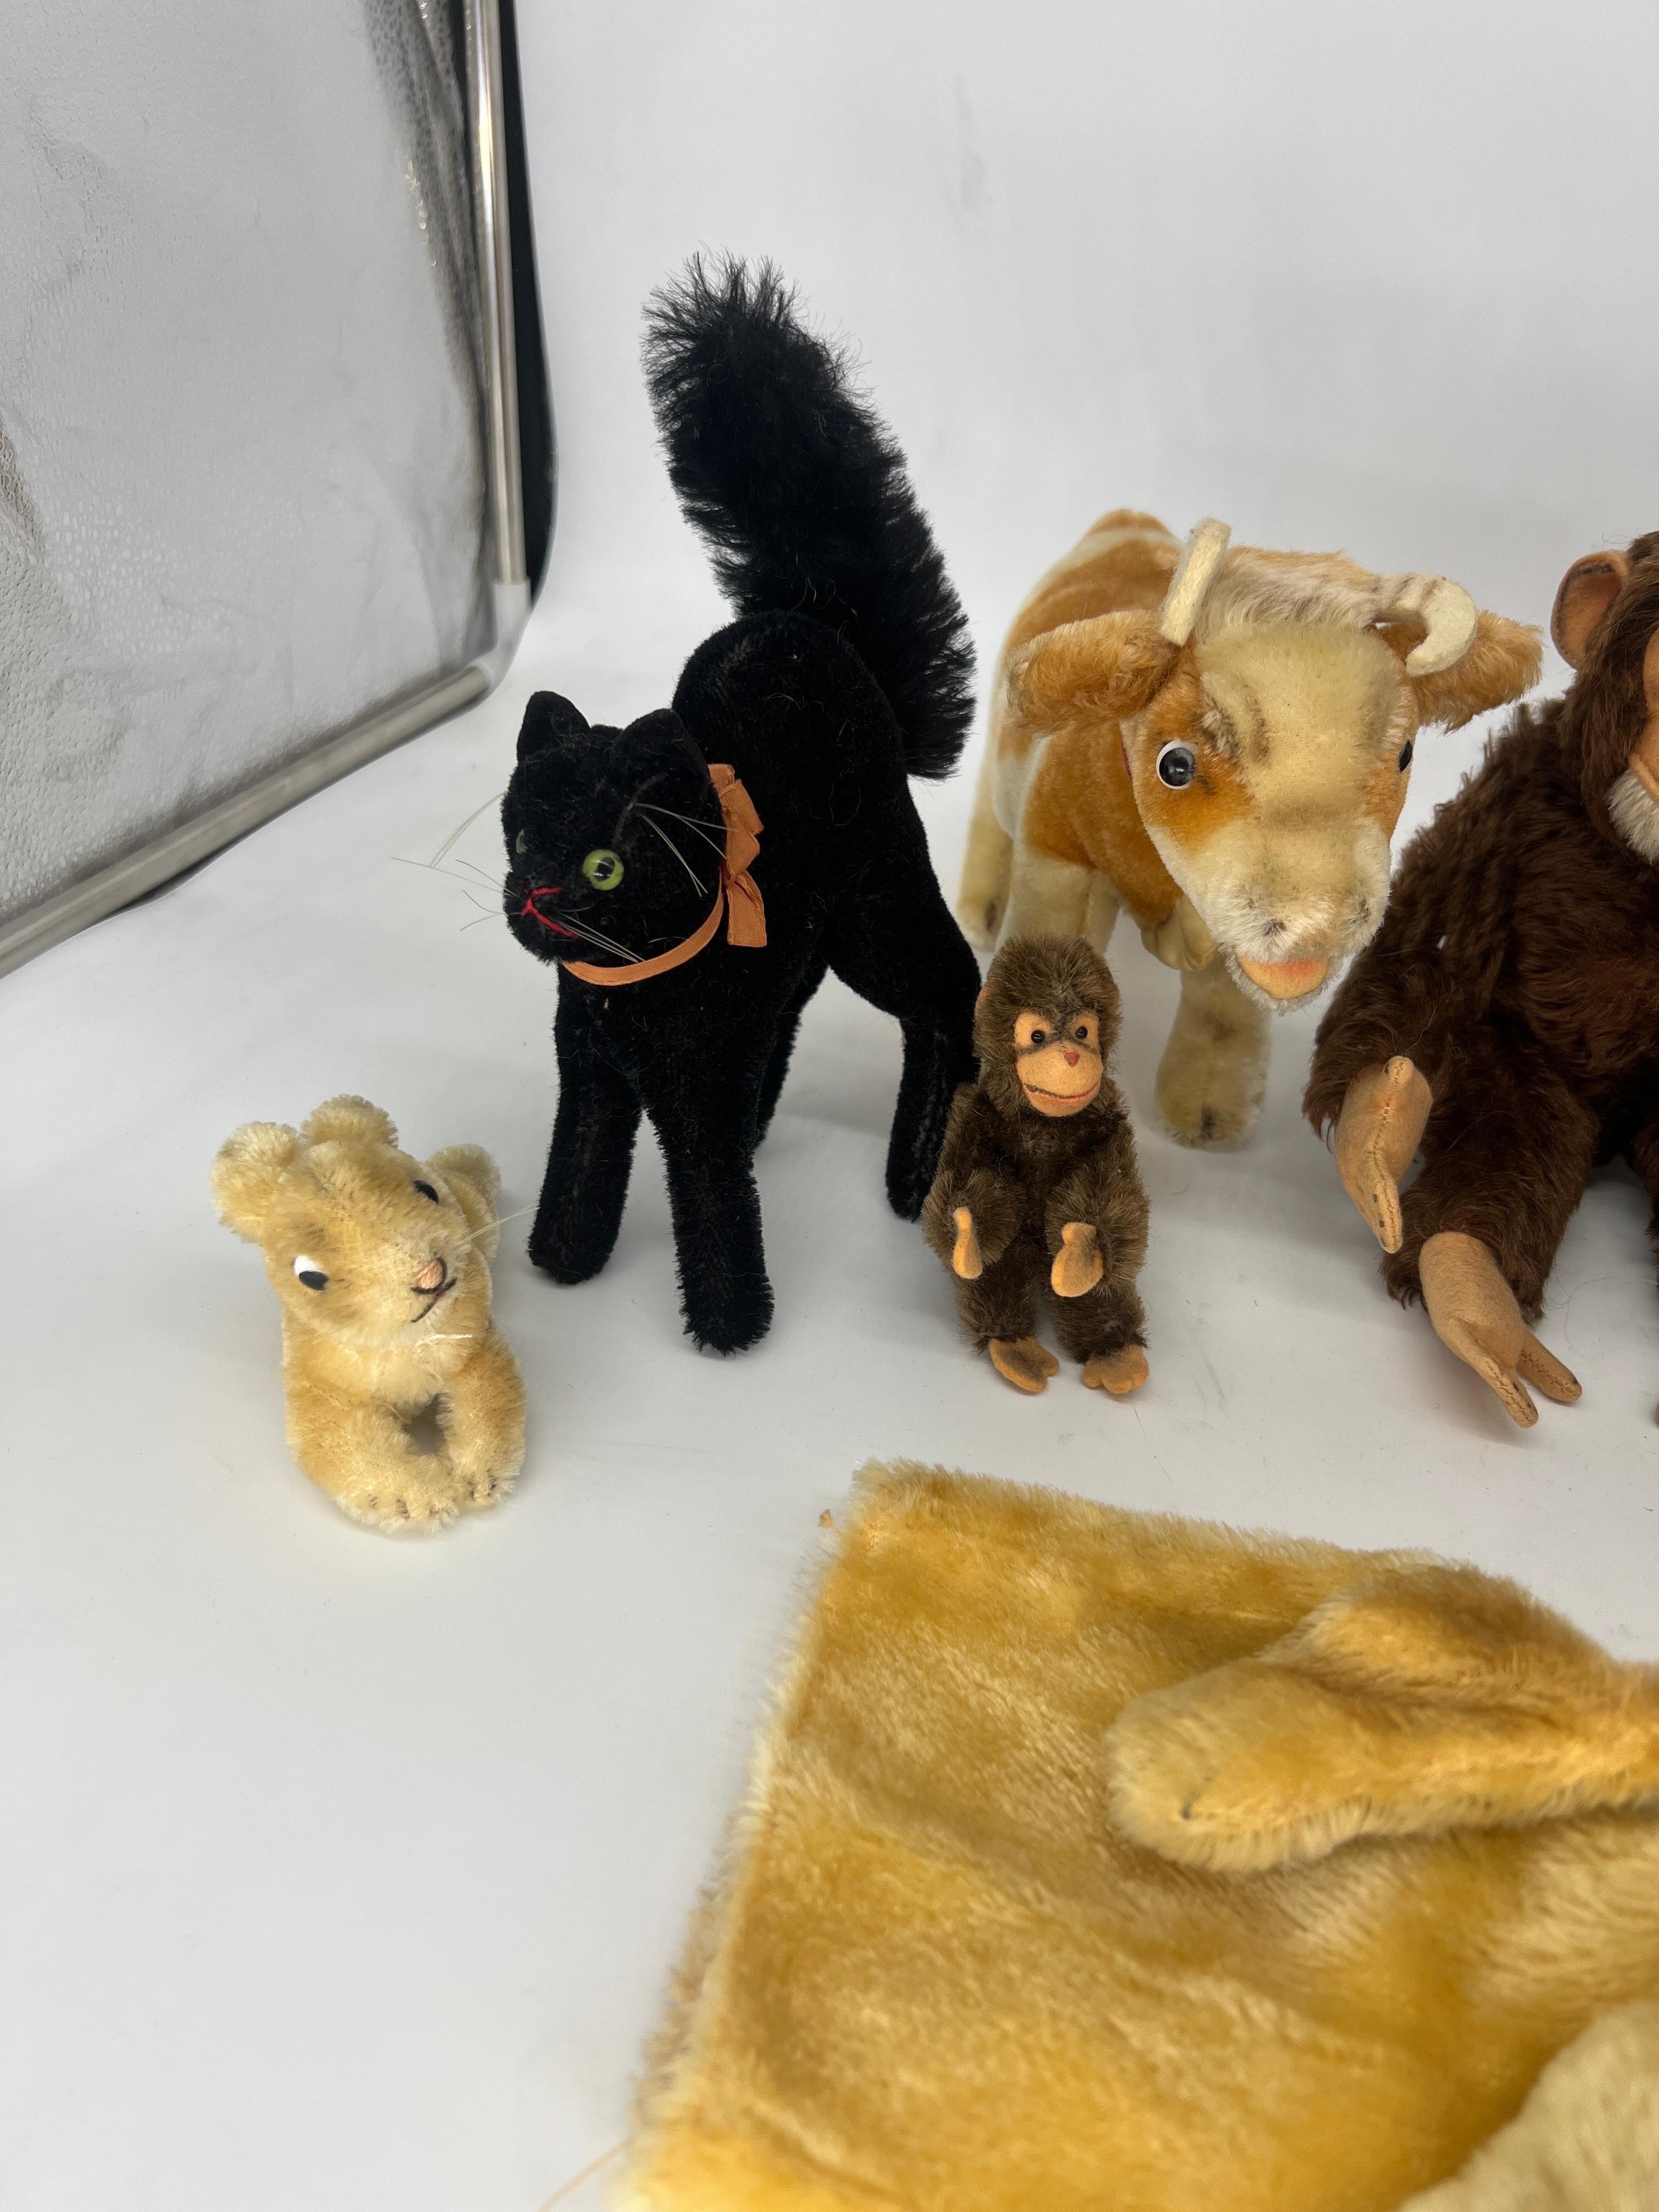 This collection of stuffed animals includes 9 figures:
1) Miniature Steiff Rabbit (No tag, chest weave).
2) RARE Steiff Black Tom Cat (No Tag).
3) Miniature Steiff Monkey (No Tag, chest weave).
4) Steiff Cow 